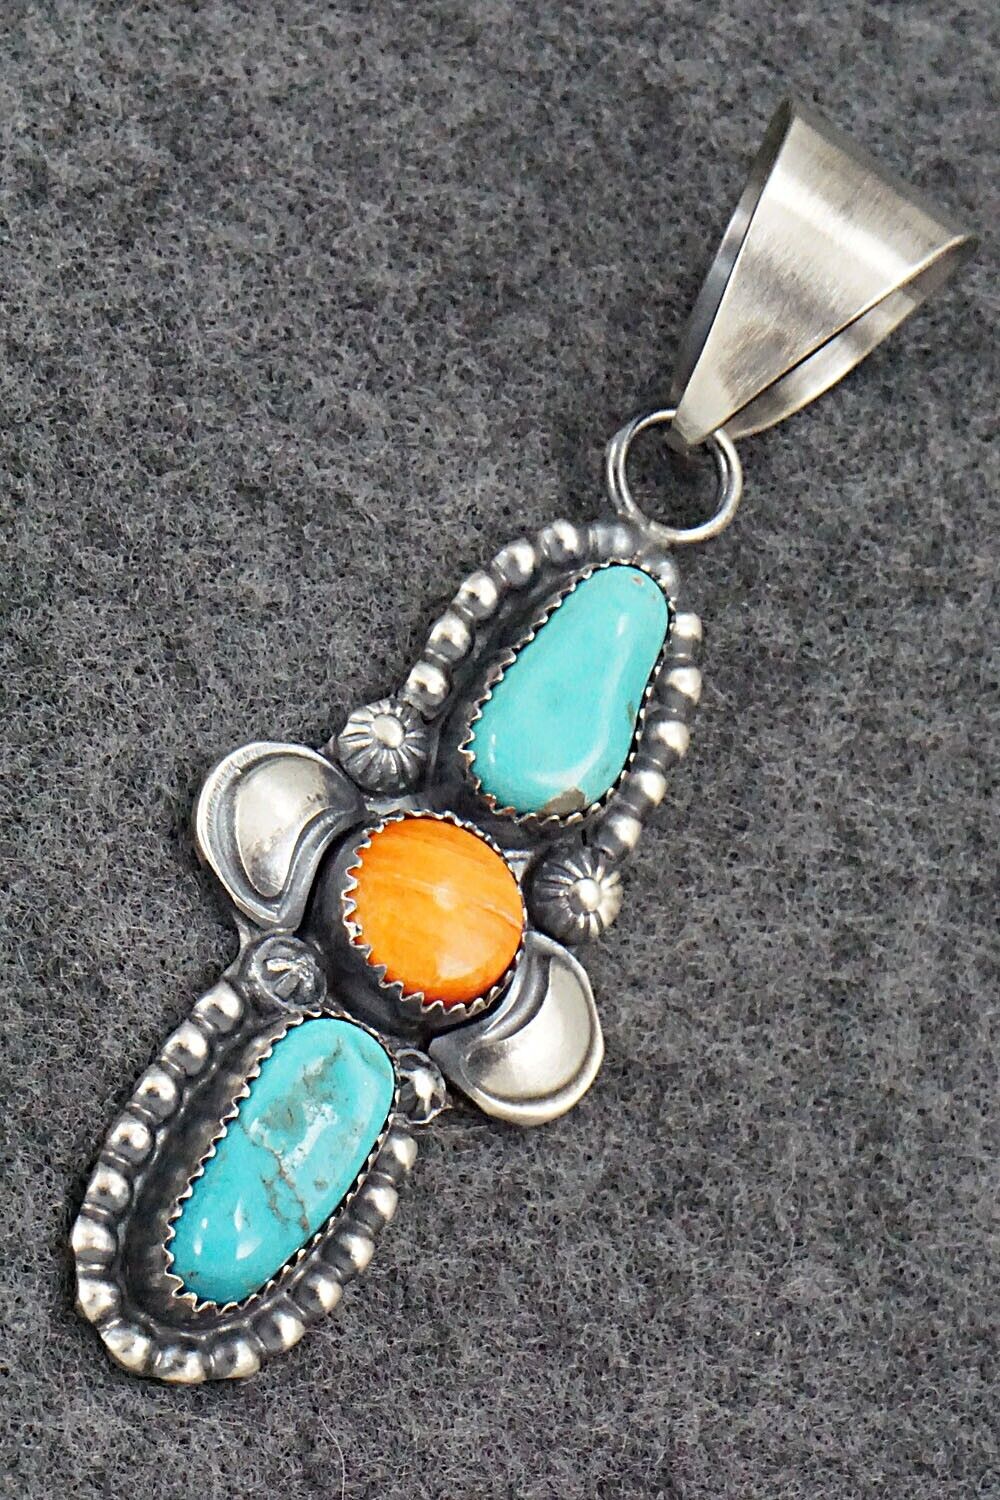 Turquoise, Spiny Oyster and Sterling Silver Pendant - Leslie Nez